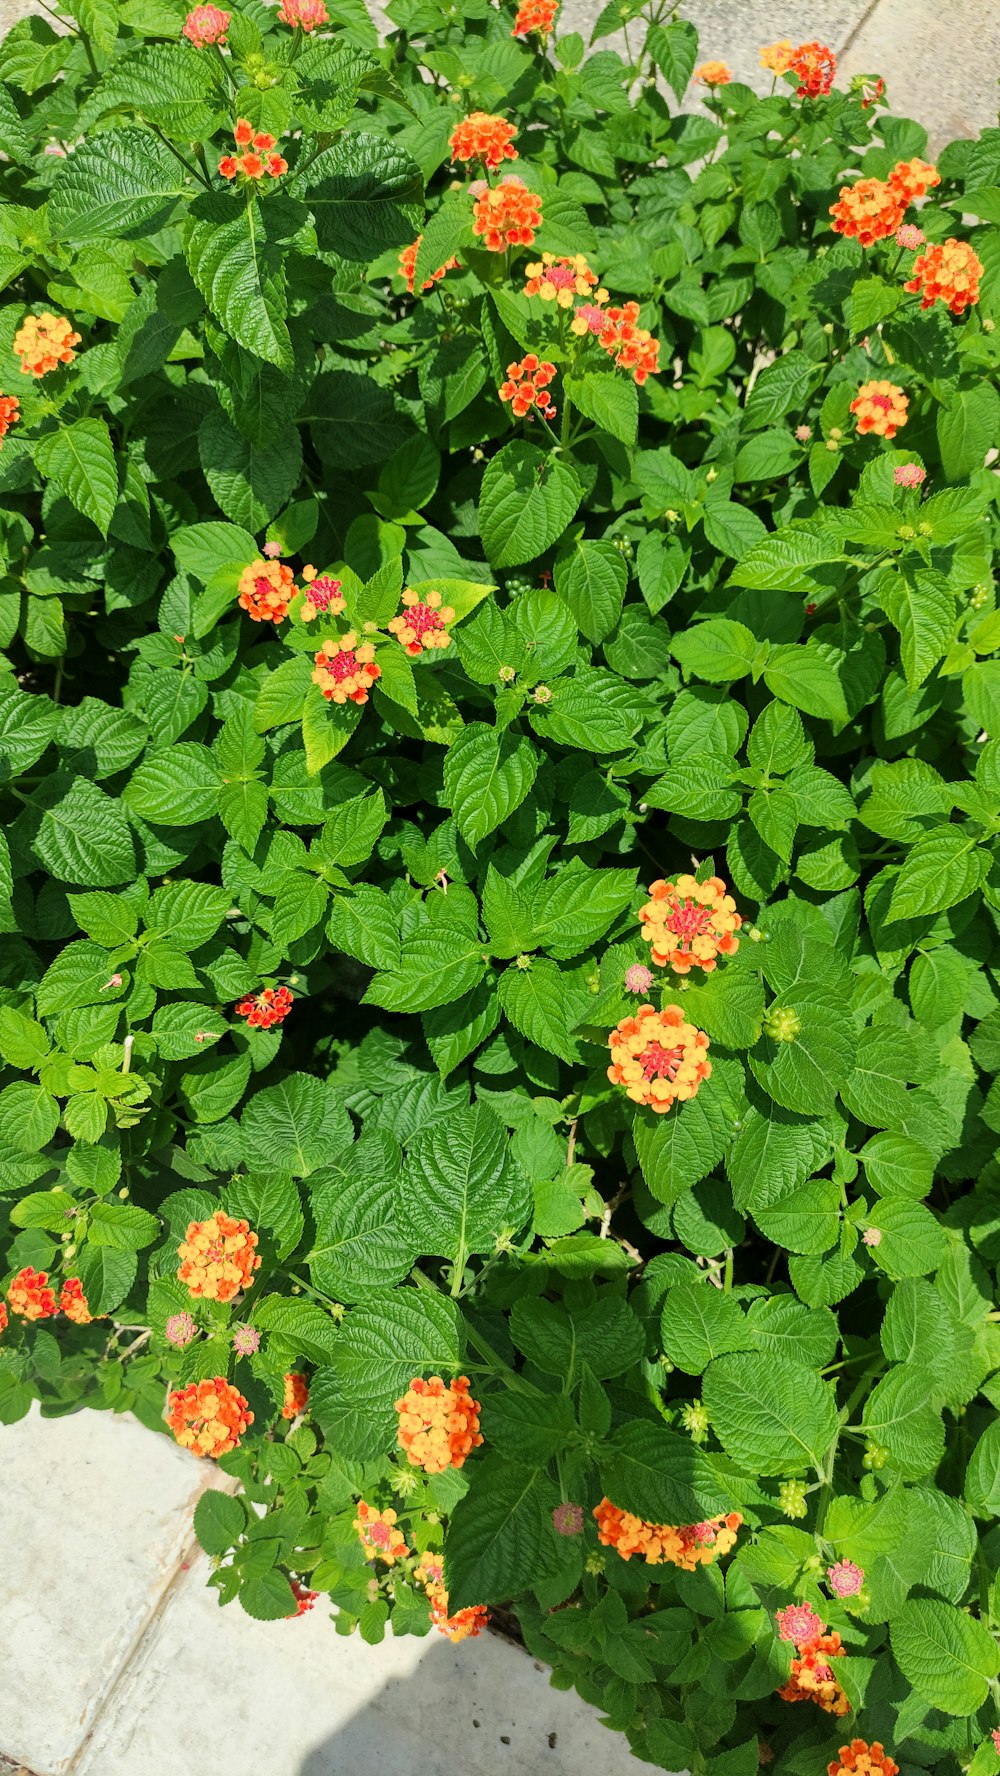 a close up of a plant with orange and yellow flowers